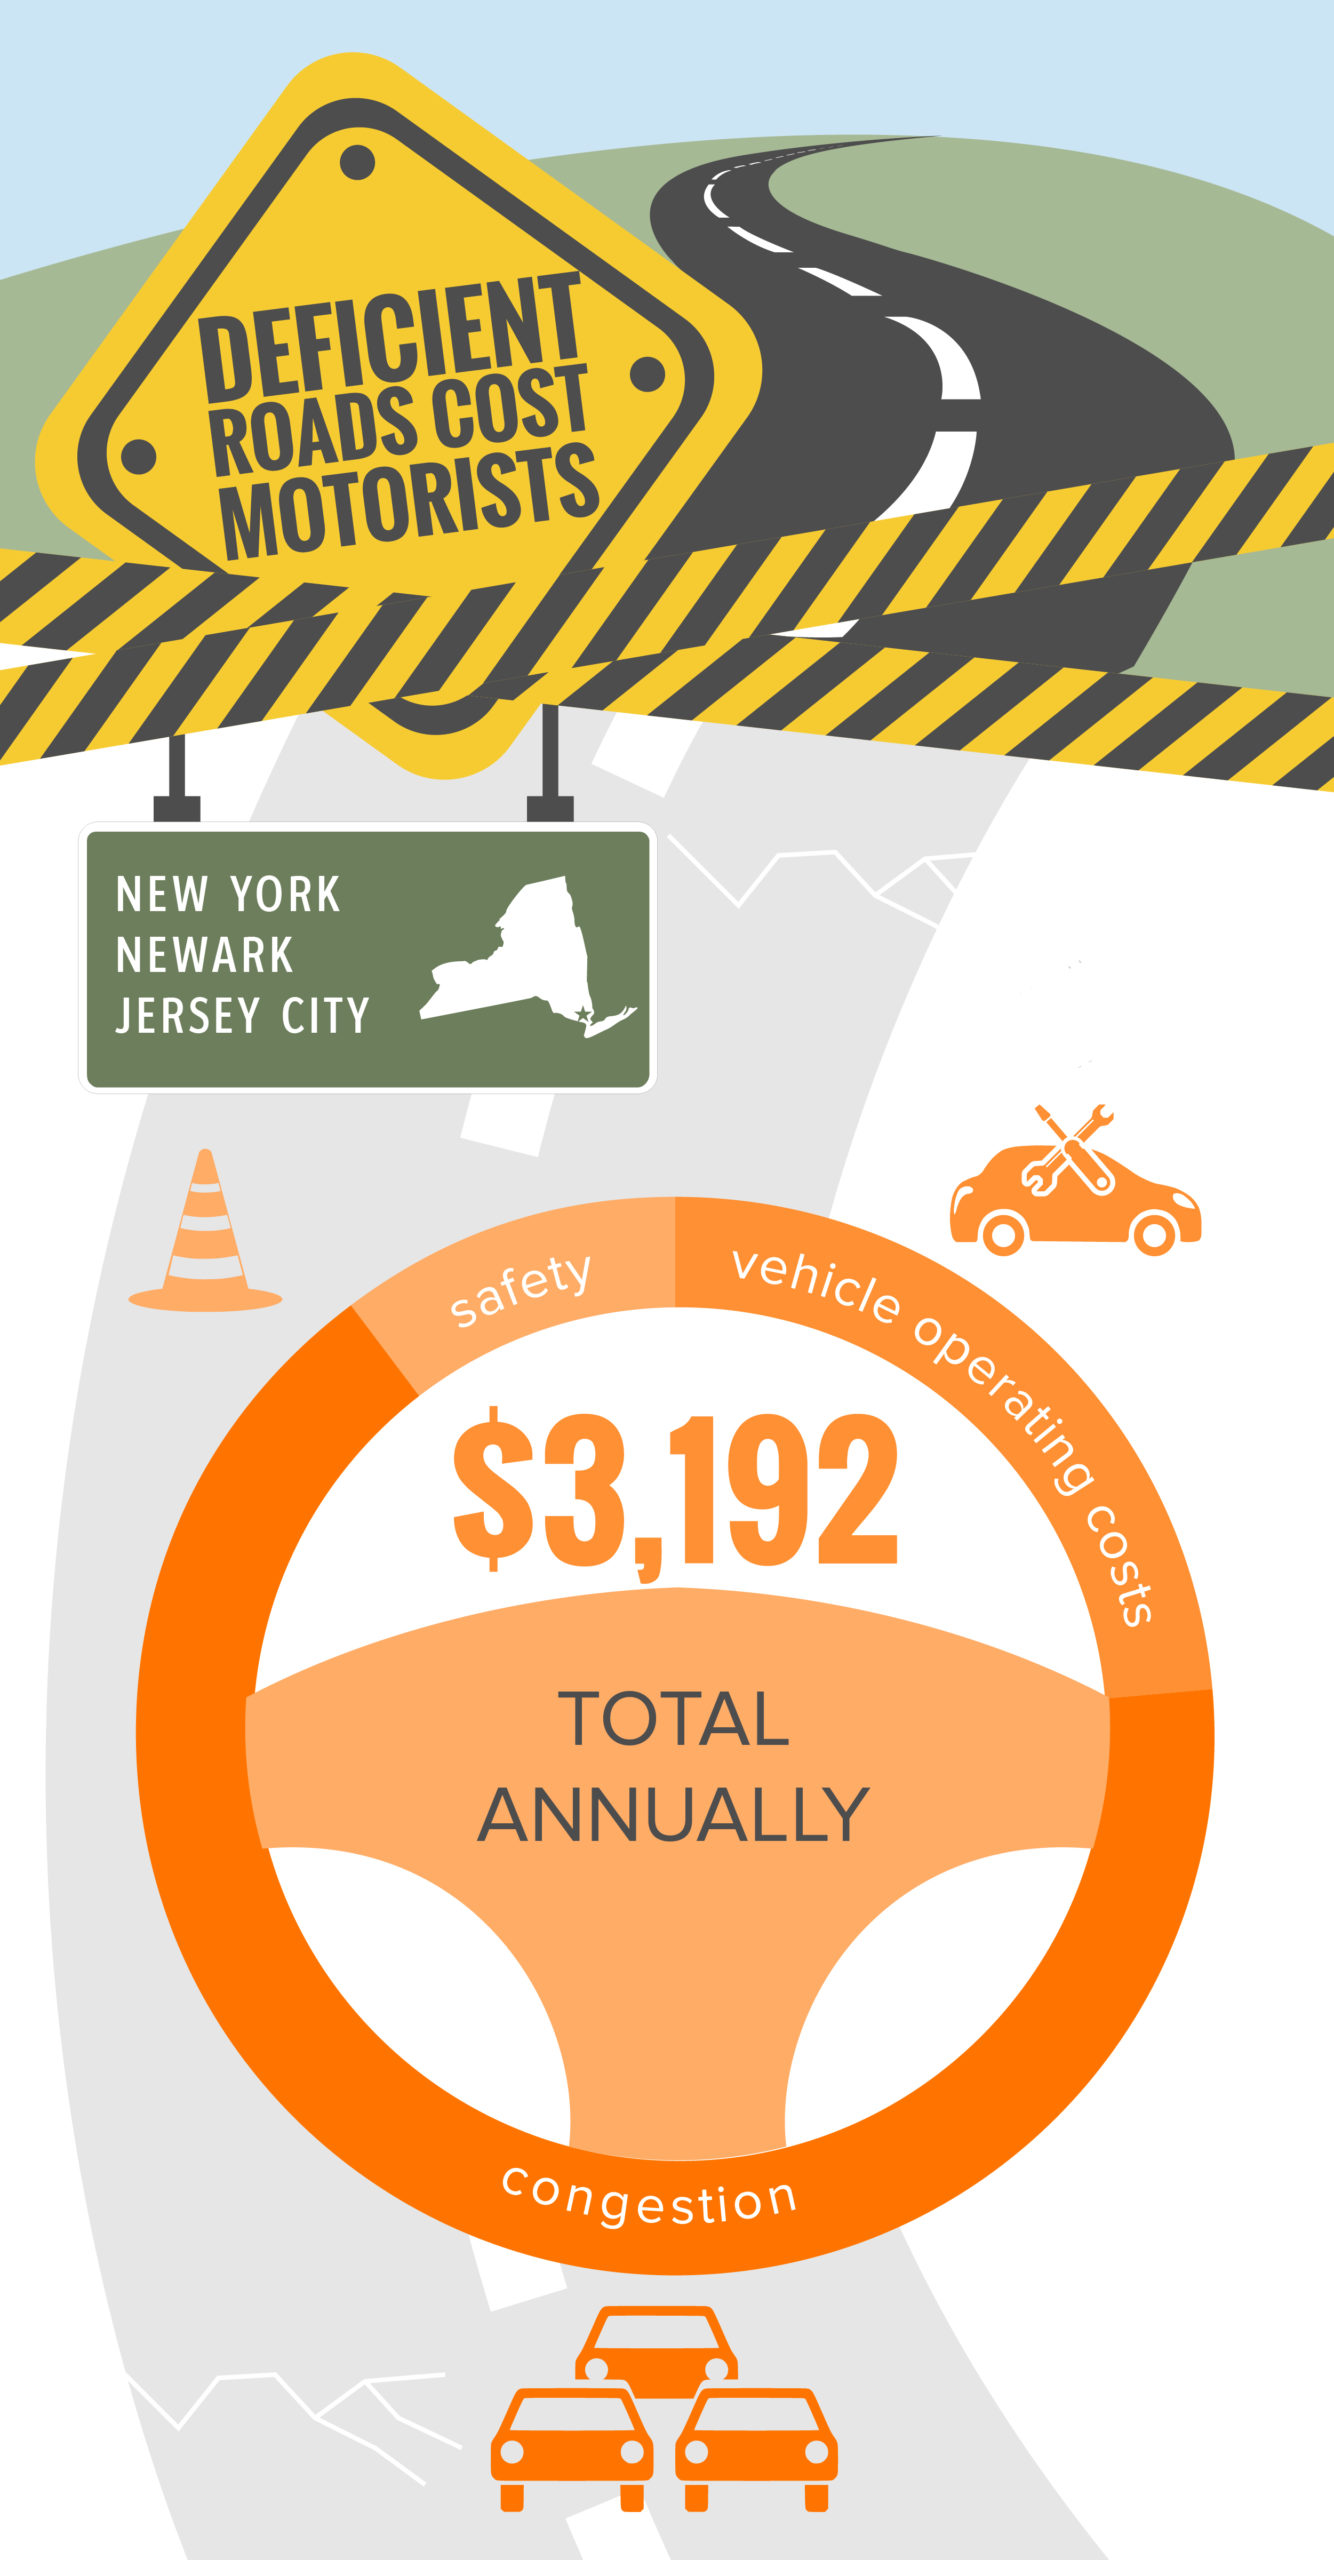 New York-Newark-Jersey City Deficient Roads Cost to Motorists Infographic – January 2022